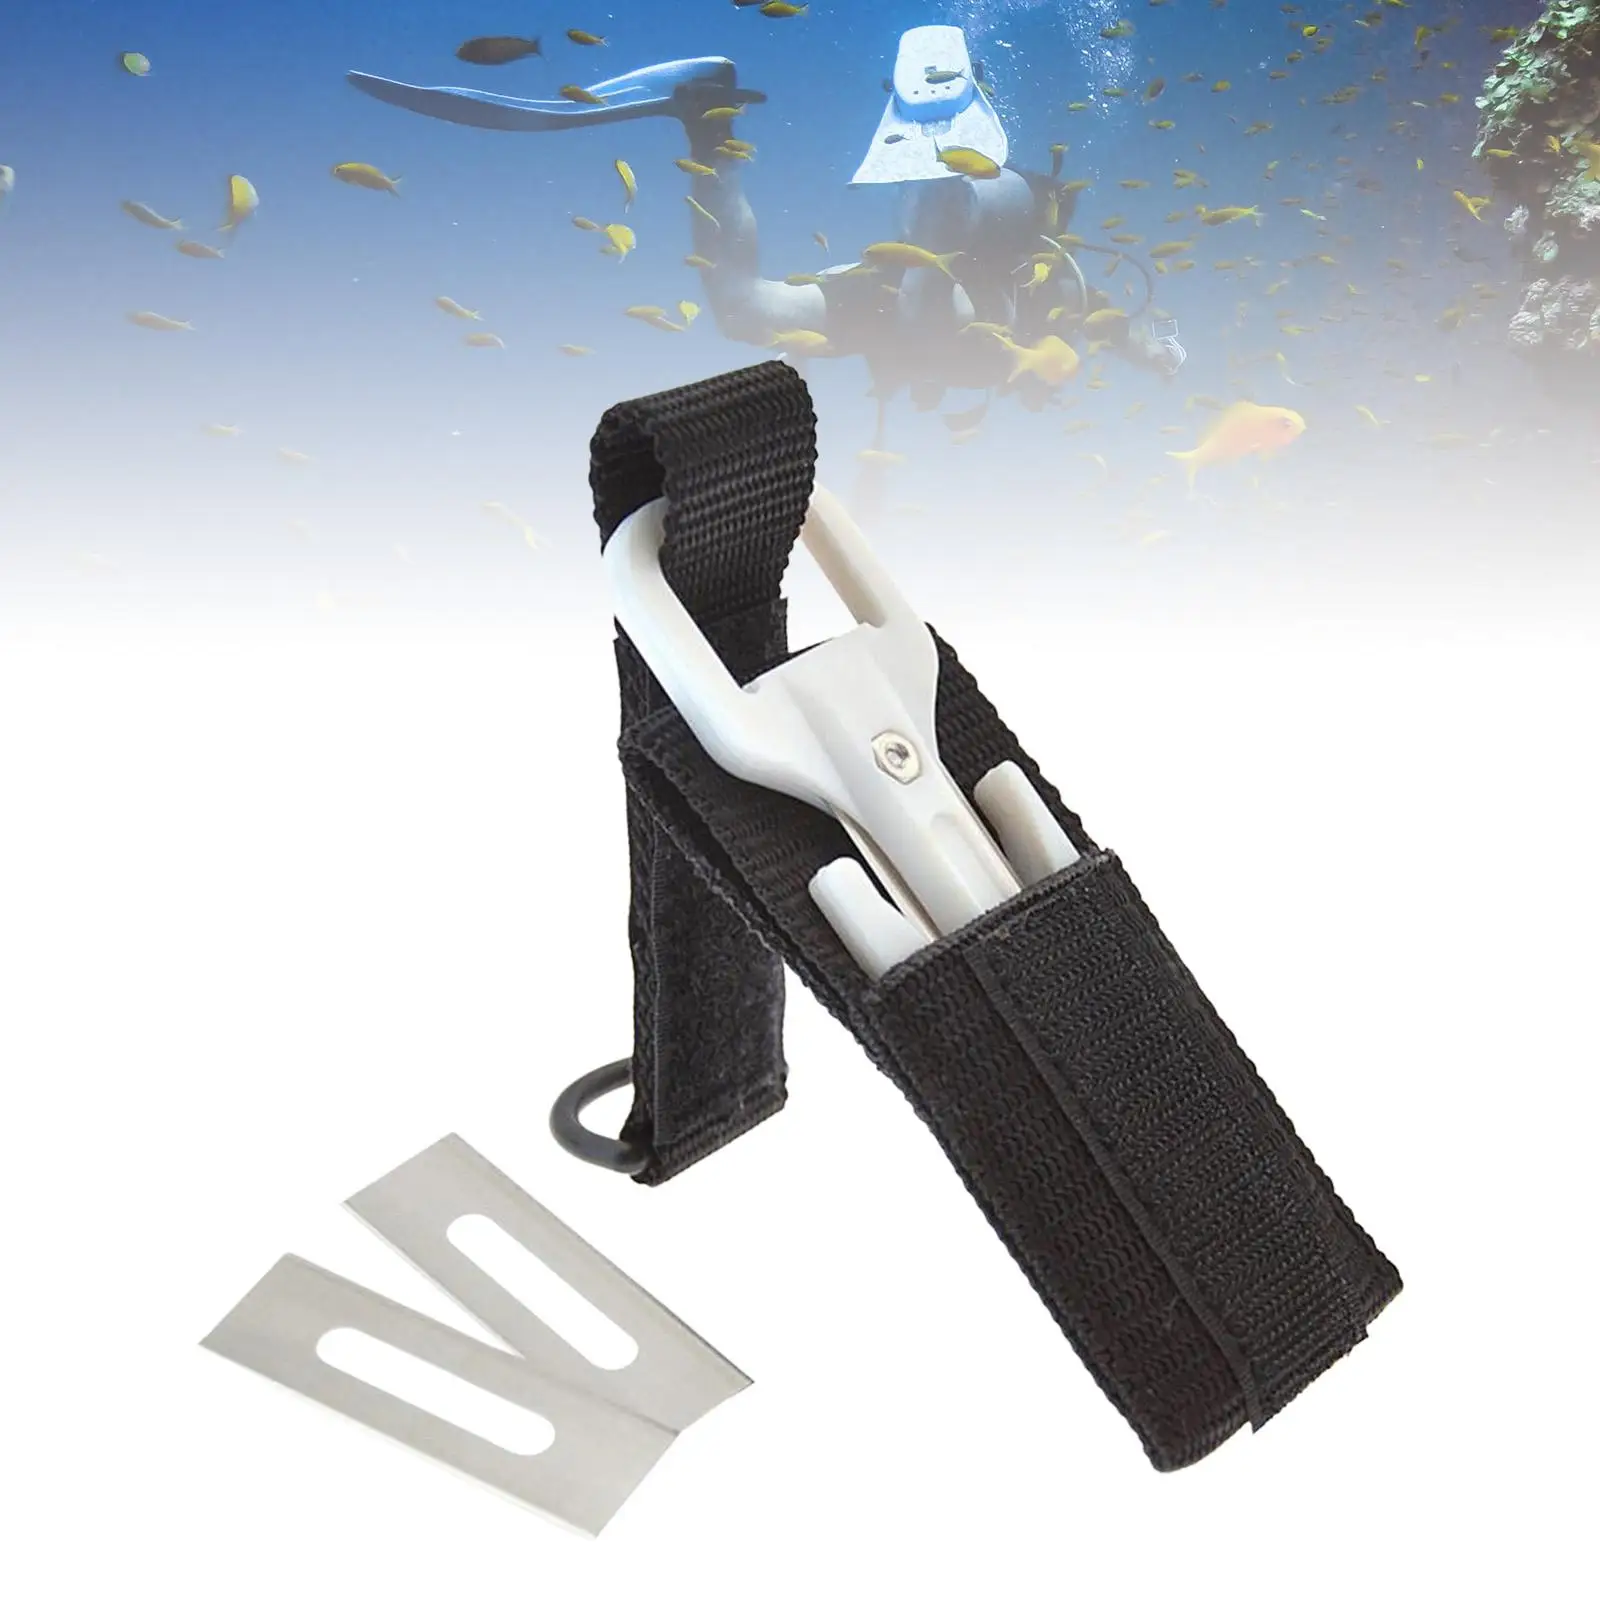 Scuba Dive Line Cutter Snorkeling Knives for Watersports Free Diving Diving